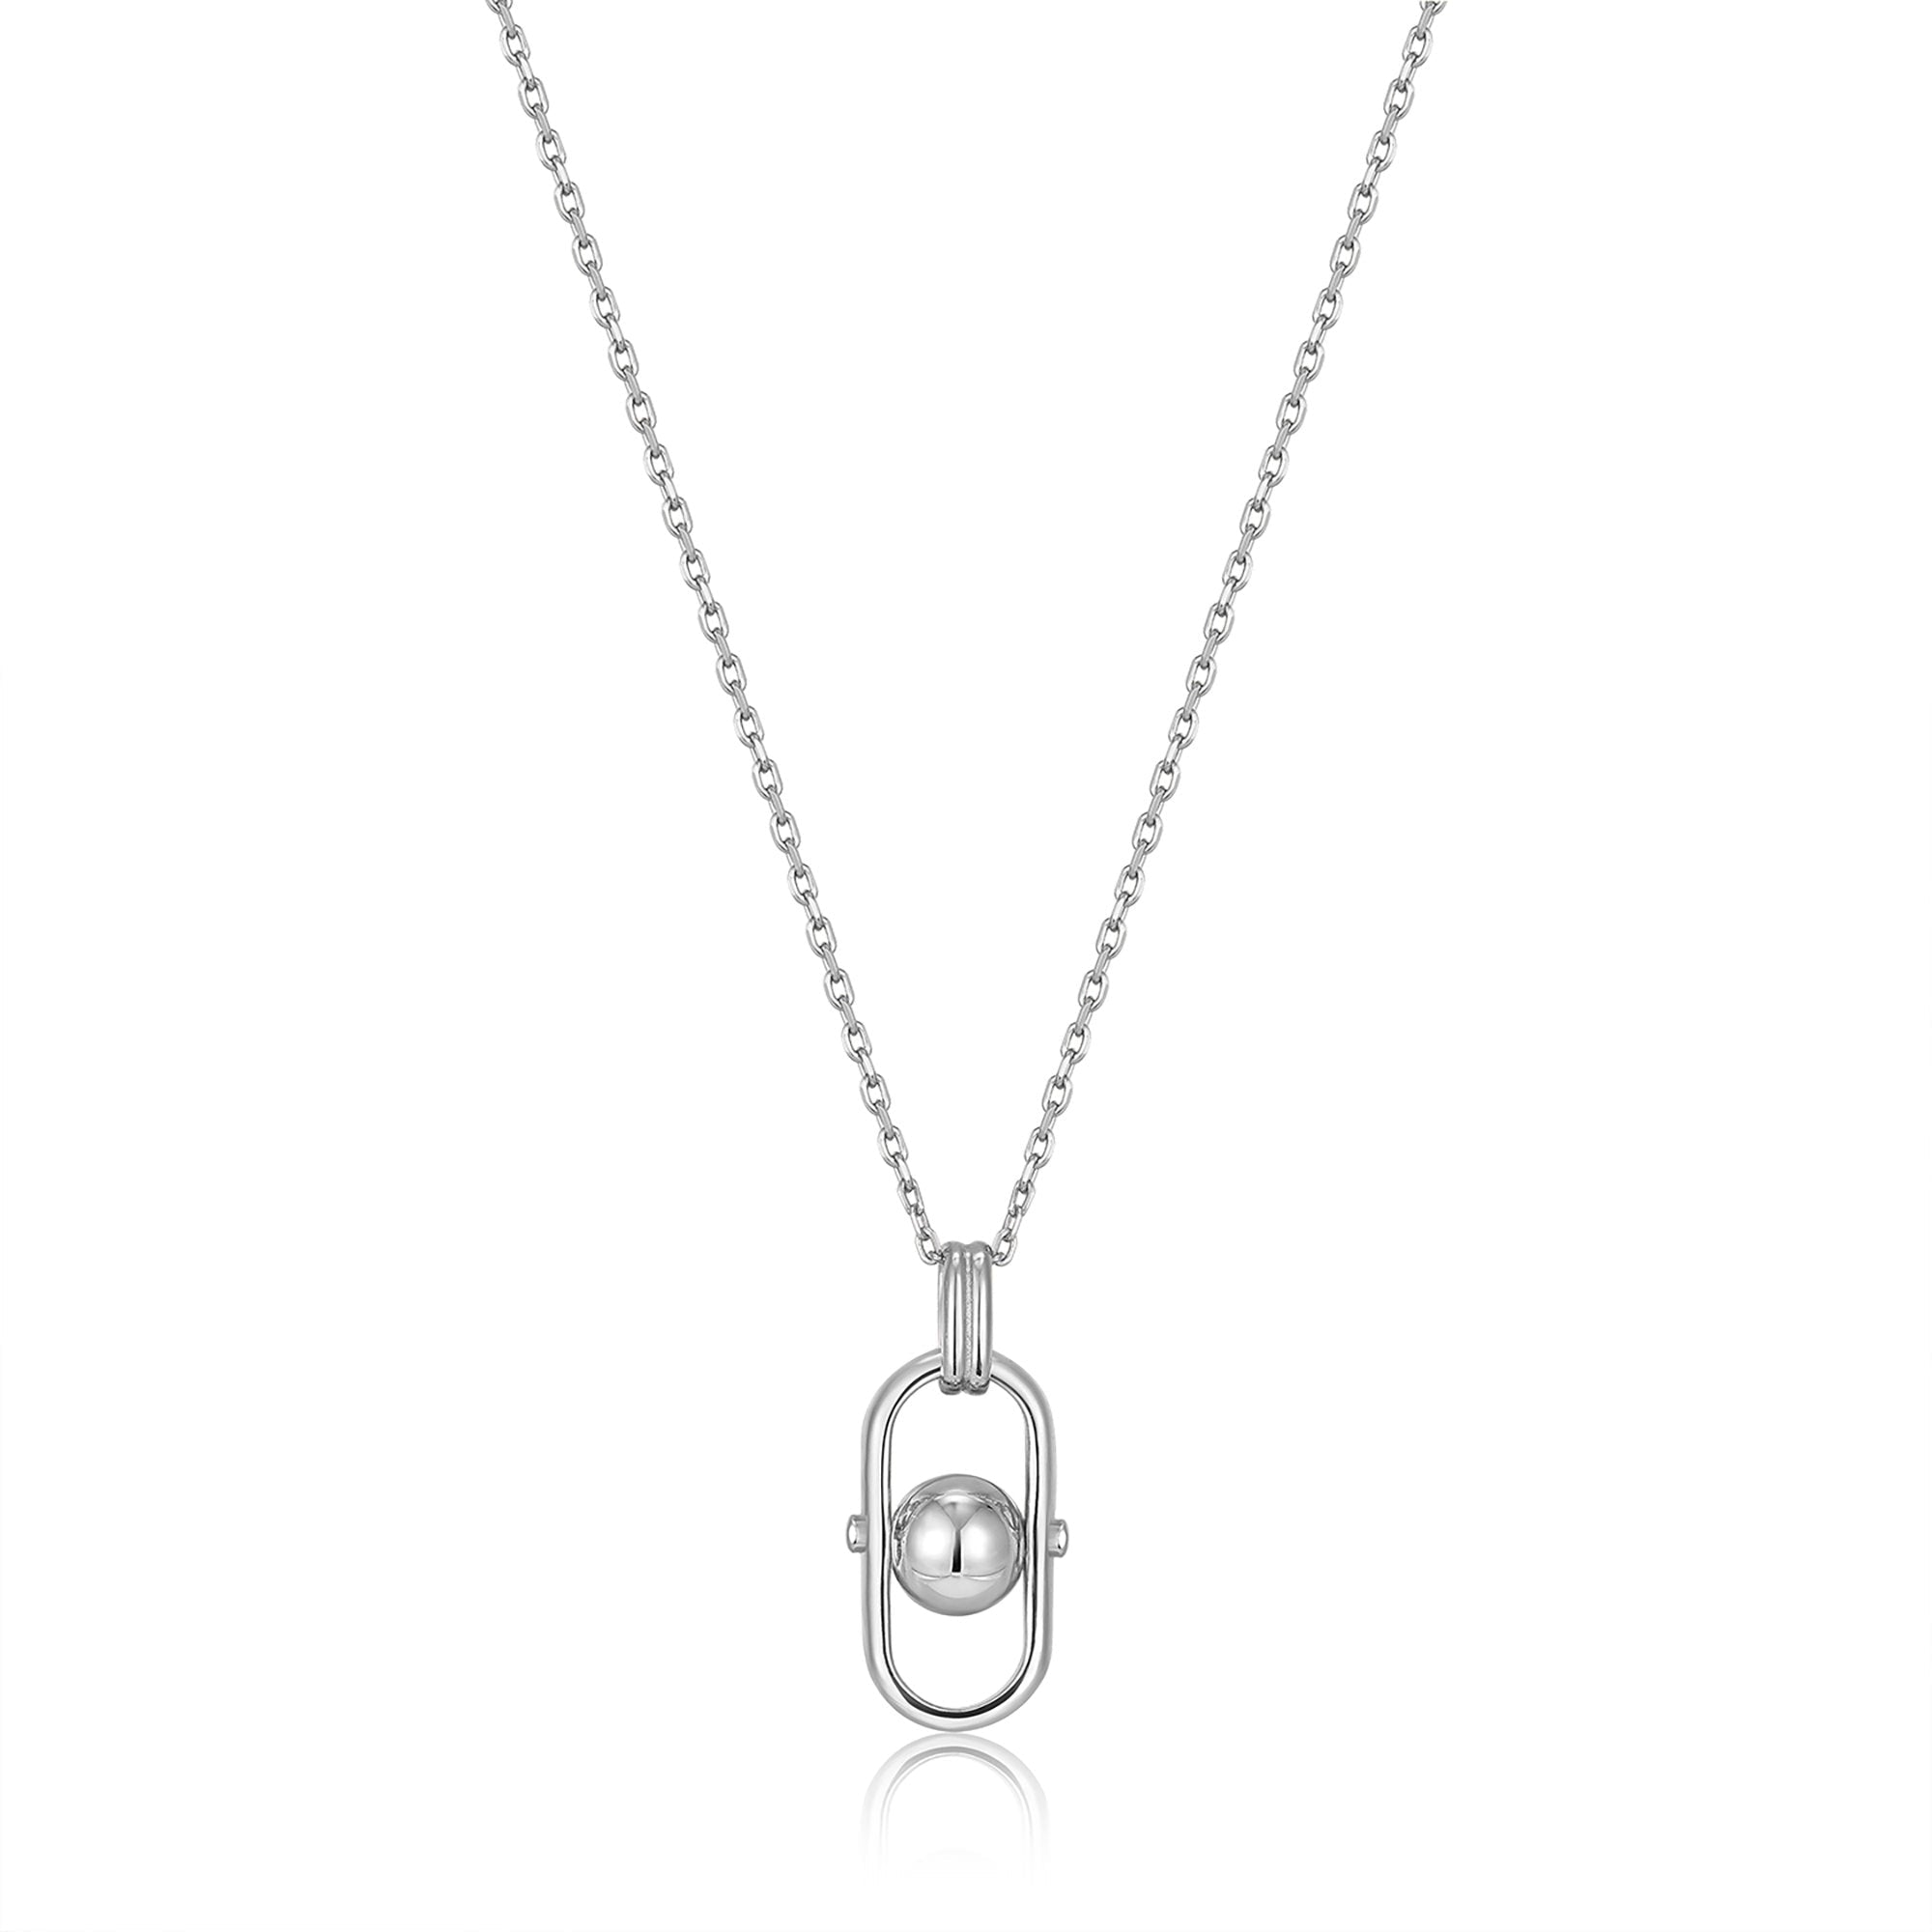 Ania Haie Orb Link Drop Pendant Necklaces